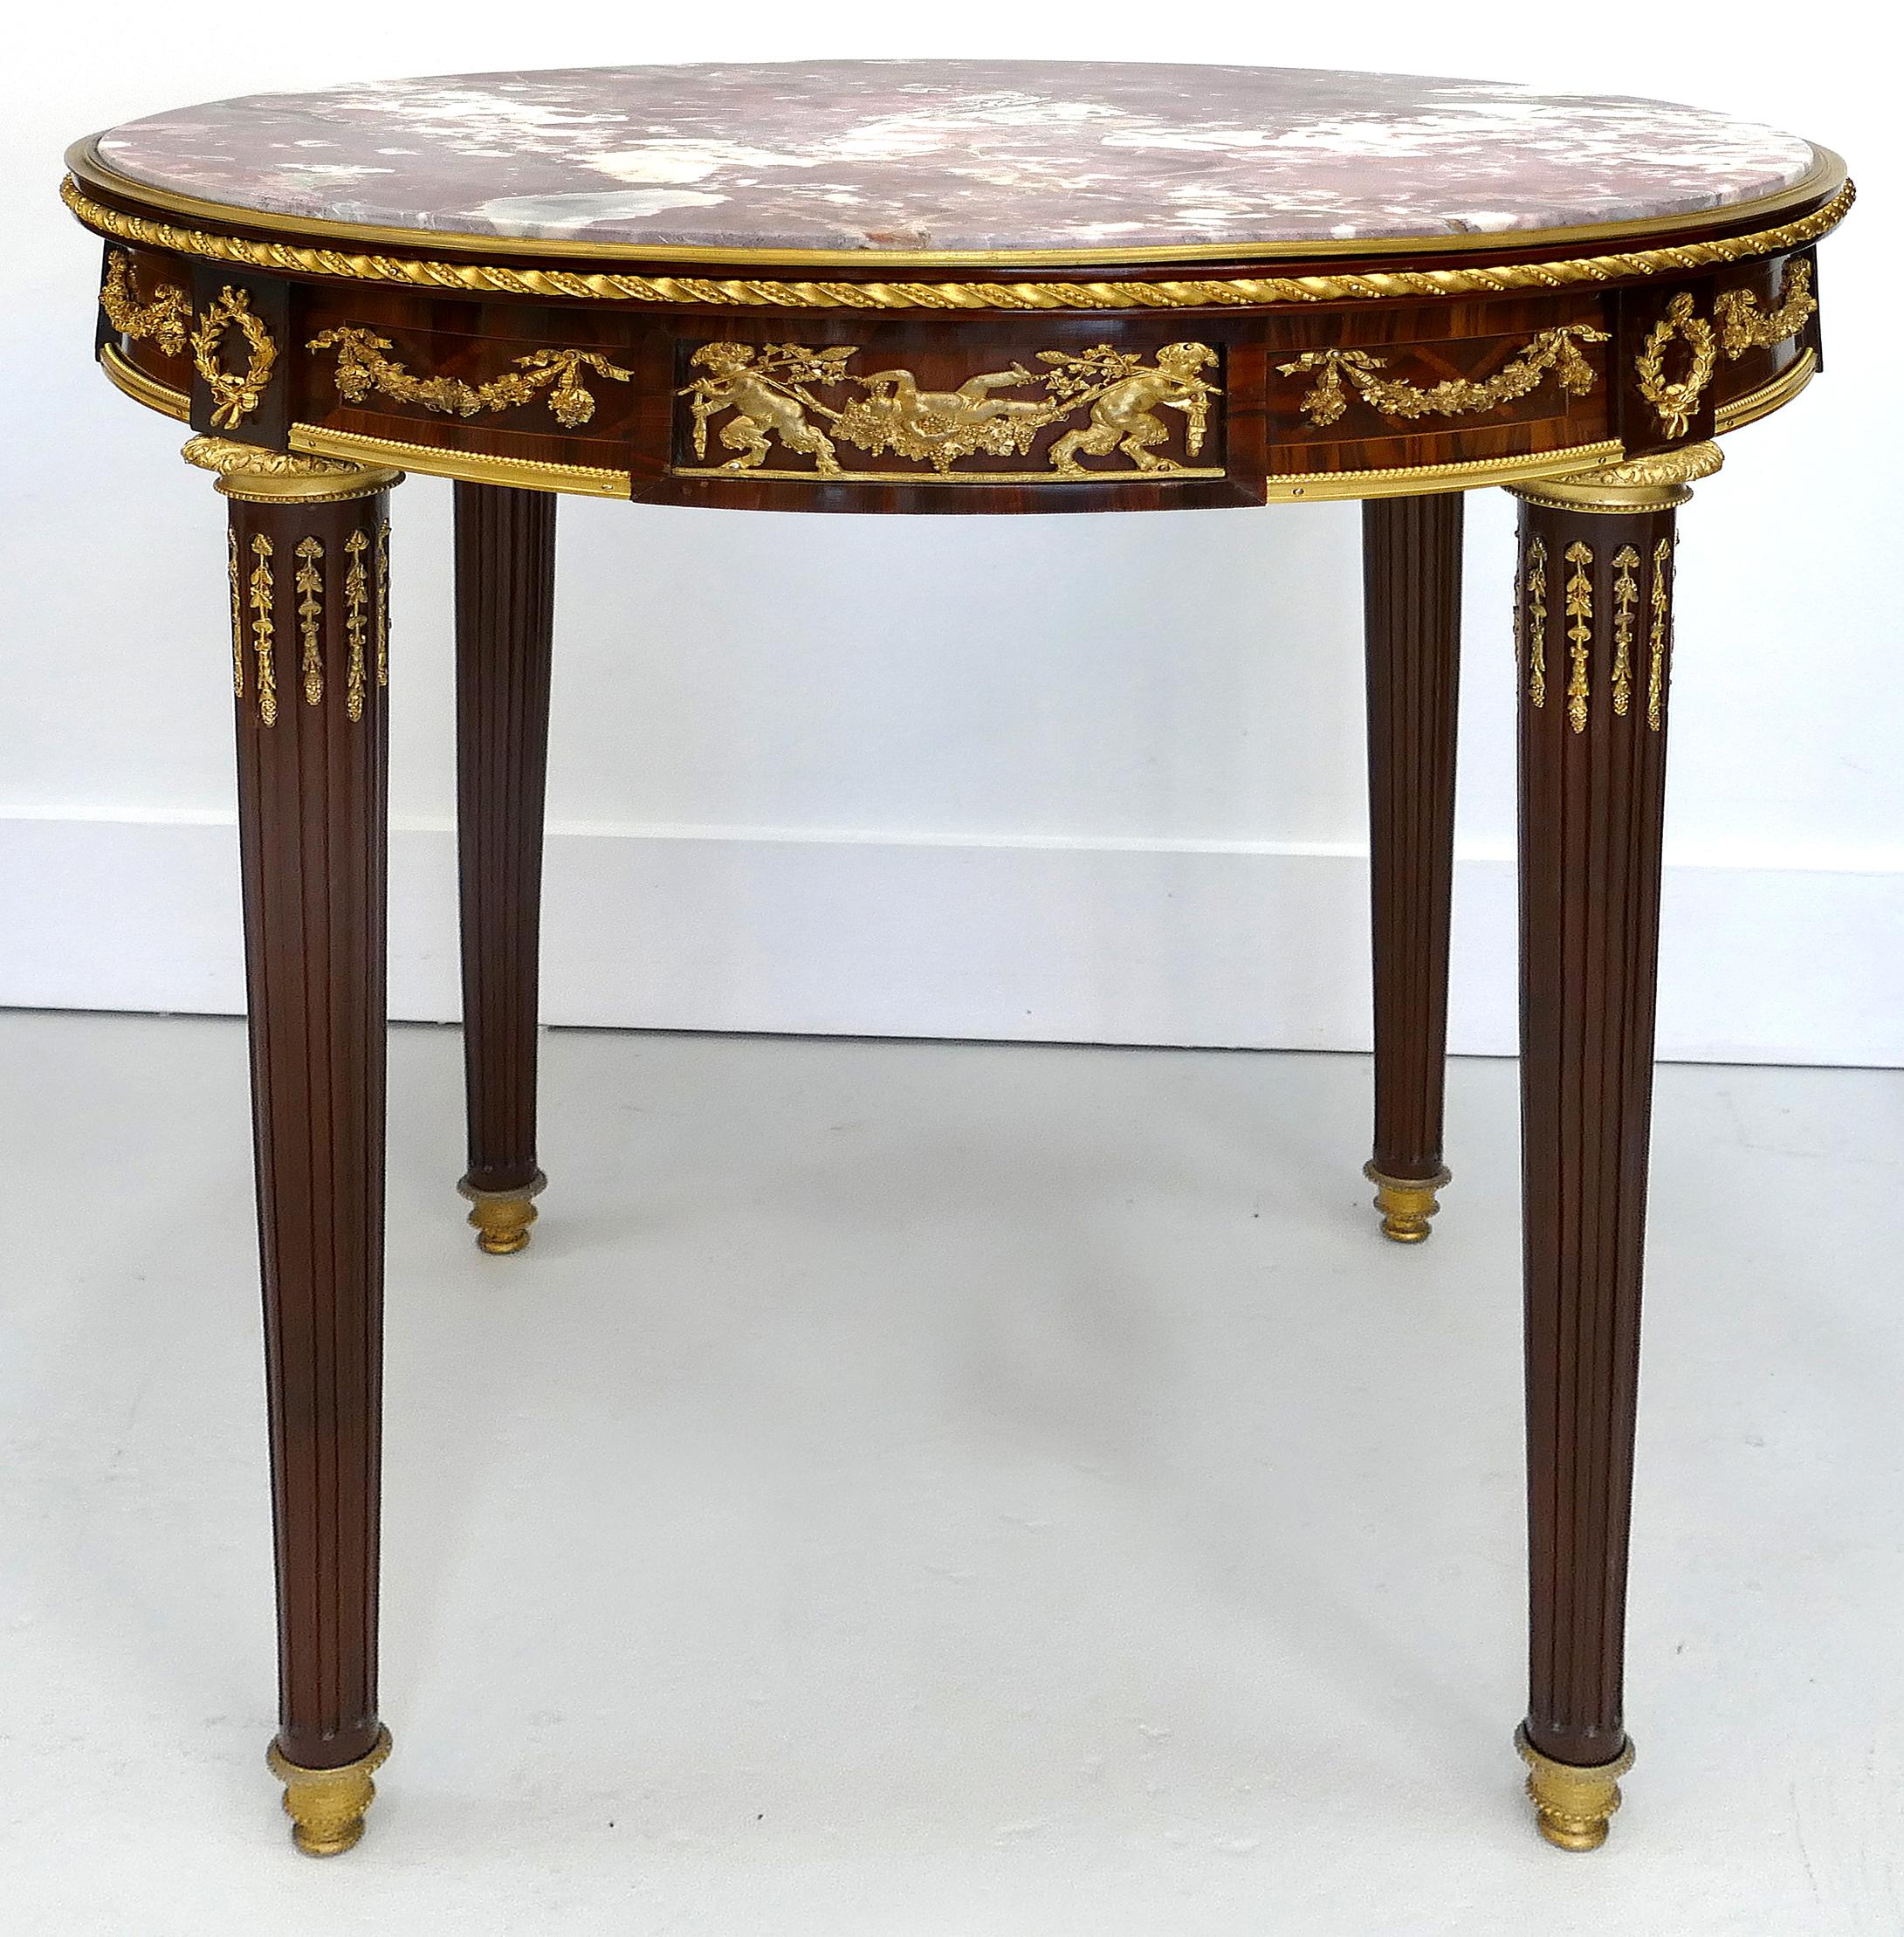 Francois Linke Louis XVI style Gueridon table, late 19th century

Offered for sale is a striking Francois Linke (1885-1946) Louis XVI style gueridon side table with gilt bronze mounted cherubs and the original marble top. The table has a single